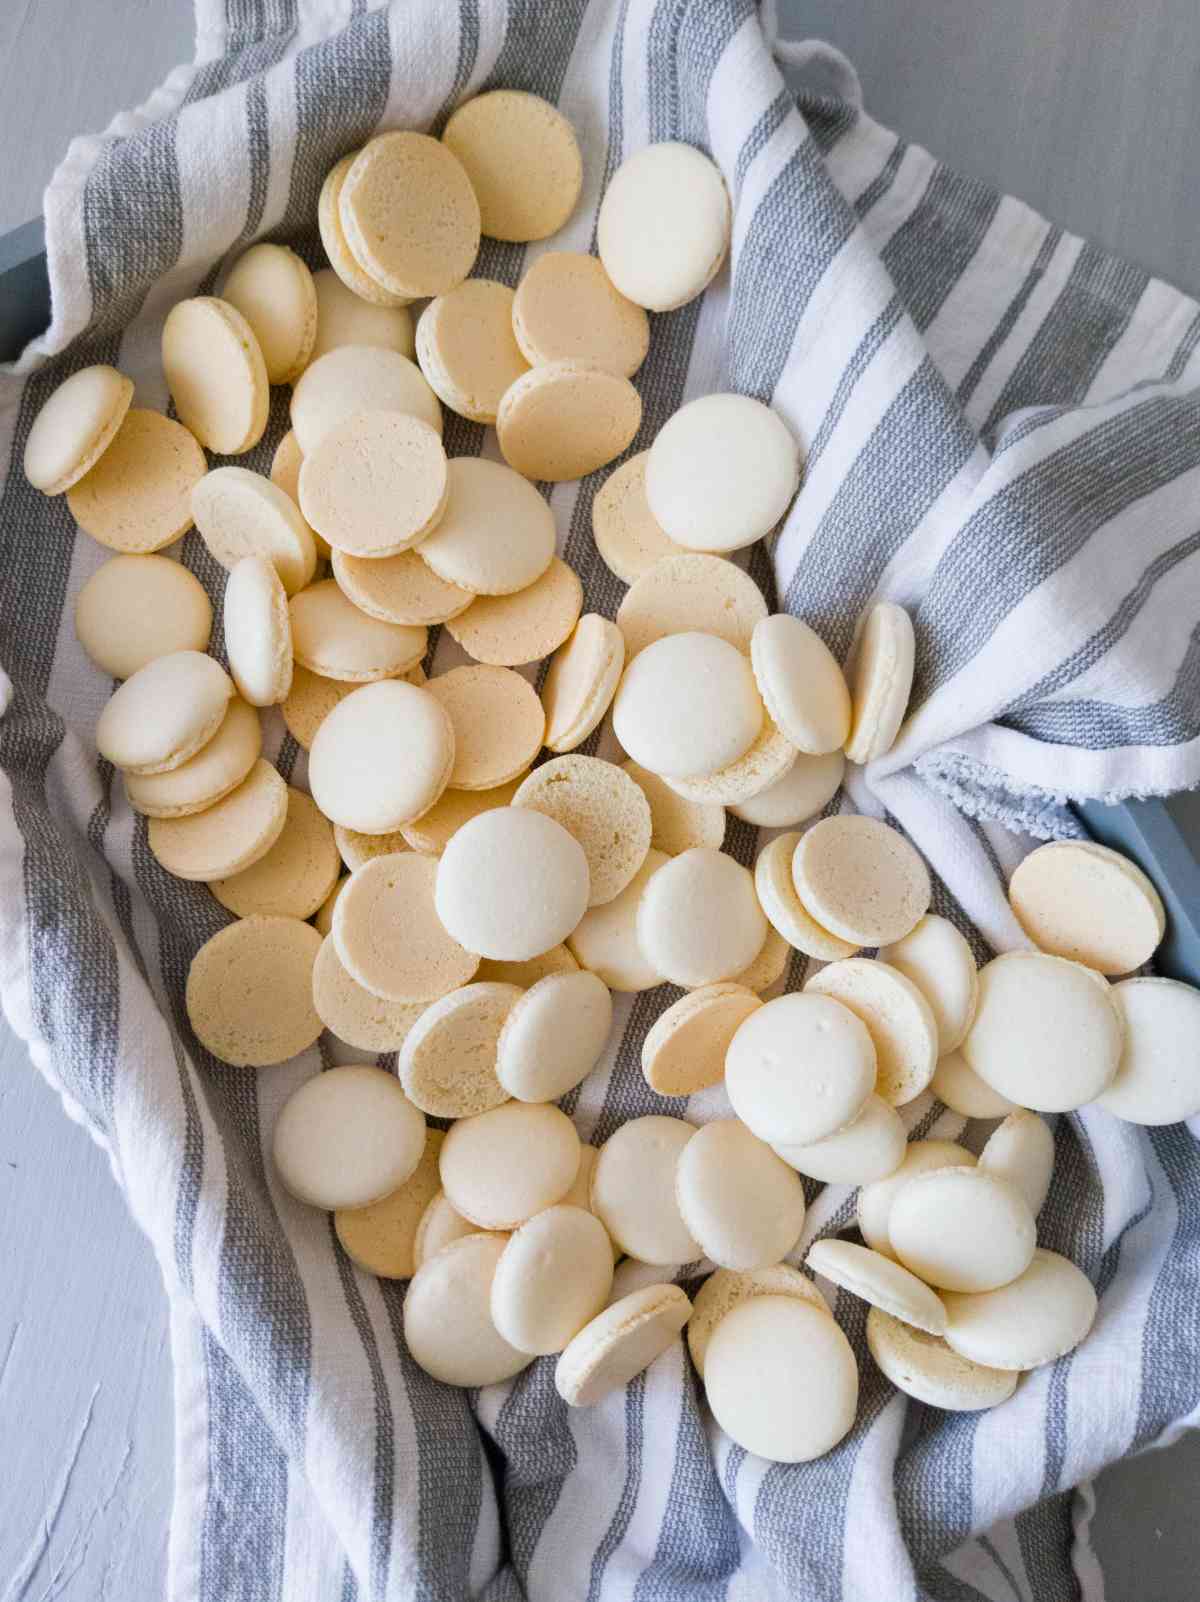 Macaron shells on a kitchen towel on a tray.